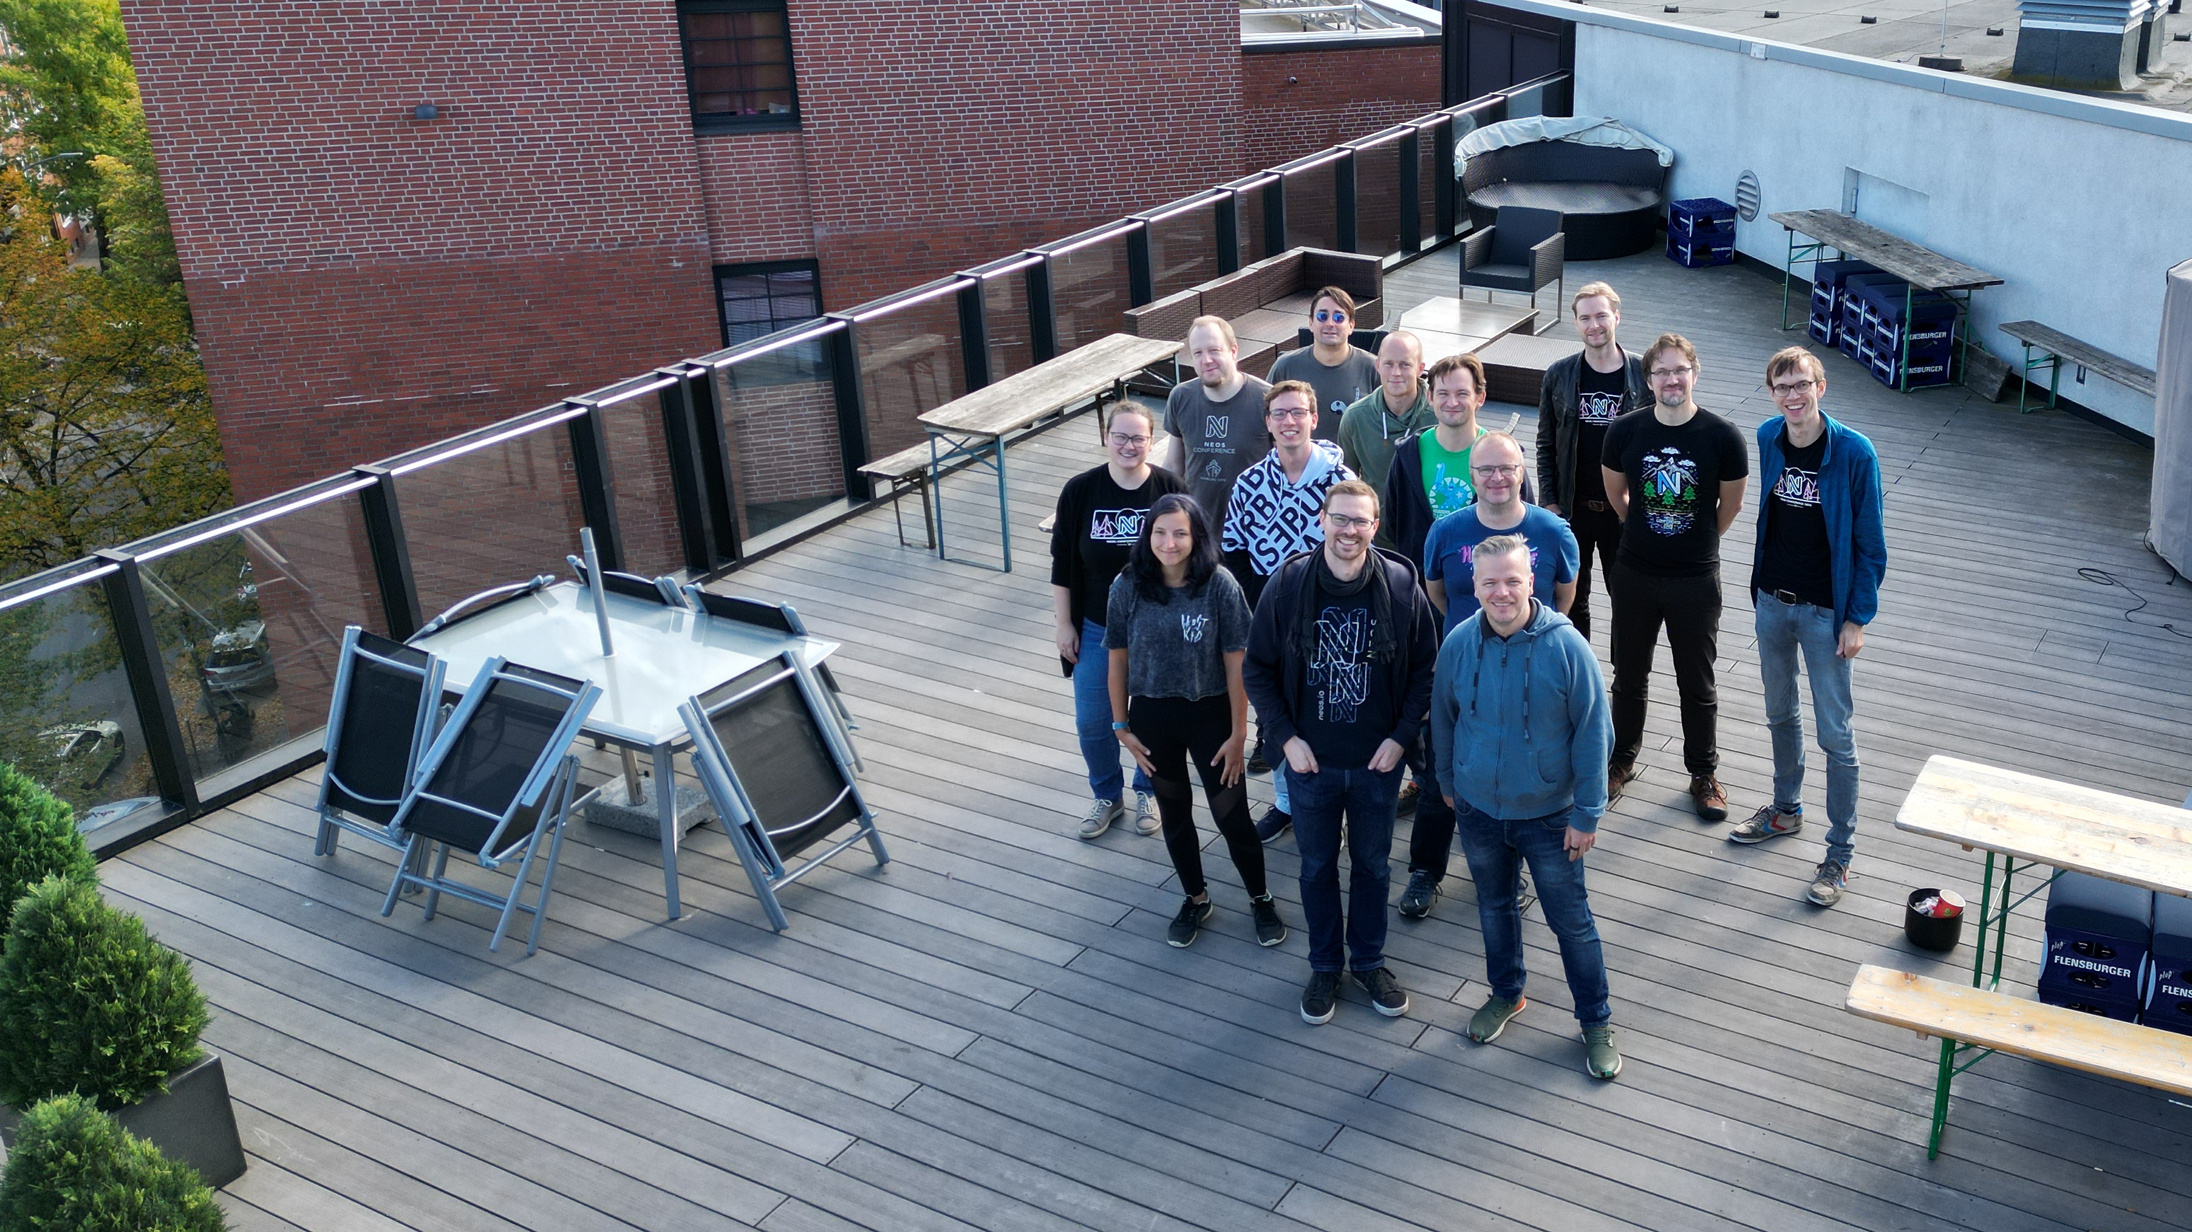 A drone photo of eleven people who where at the Neos Sprint. They are standing on the roof terrace of the building where Sitegeist is located.